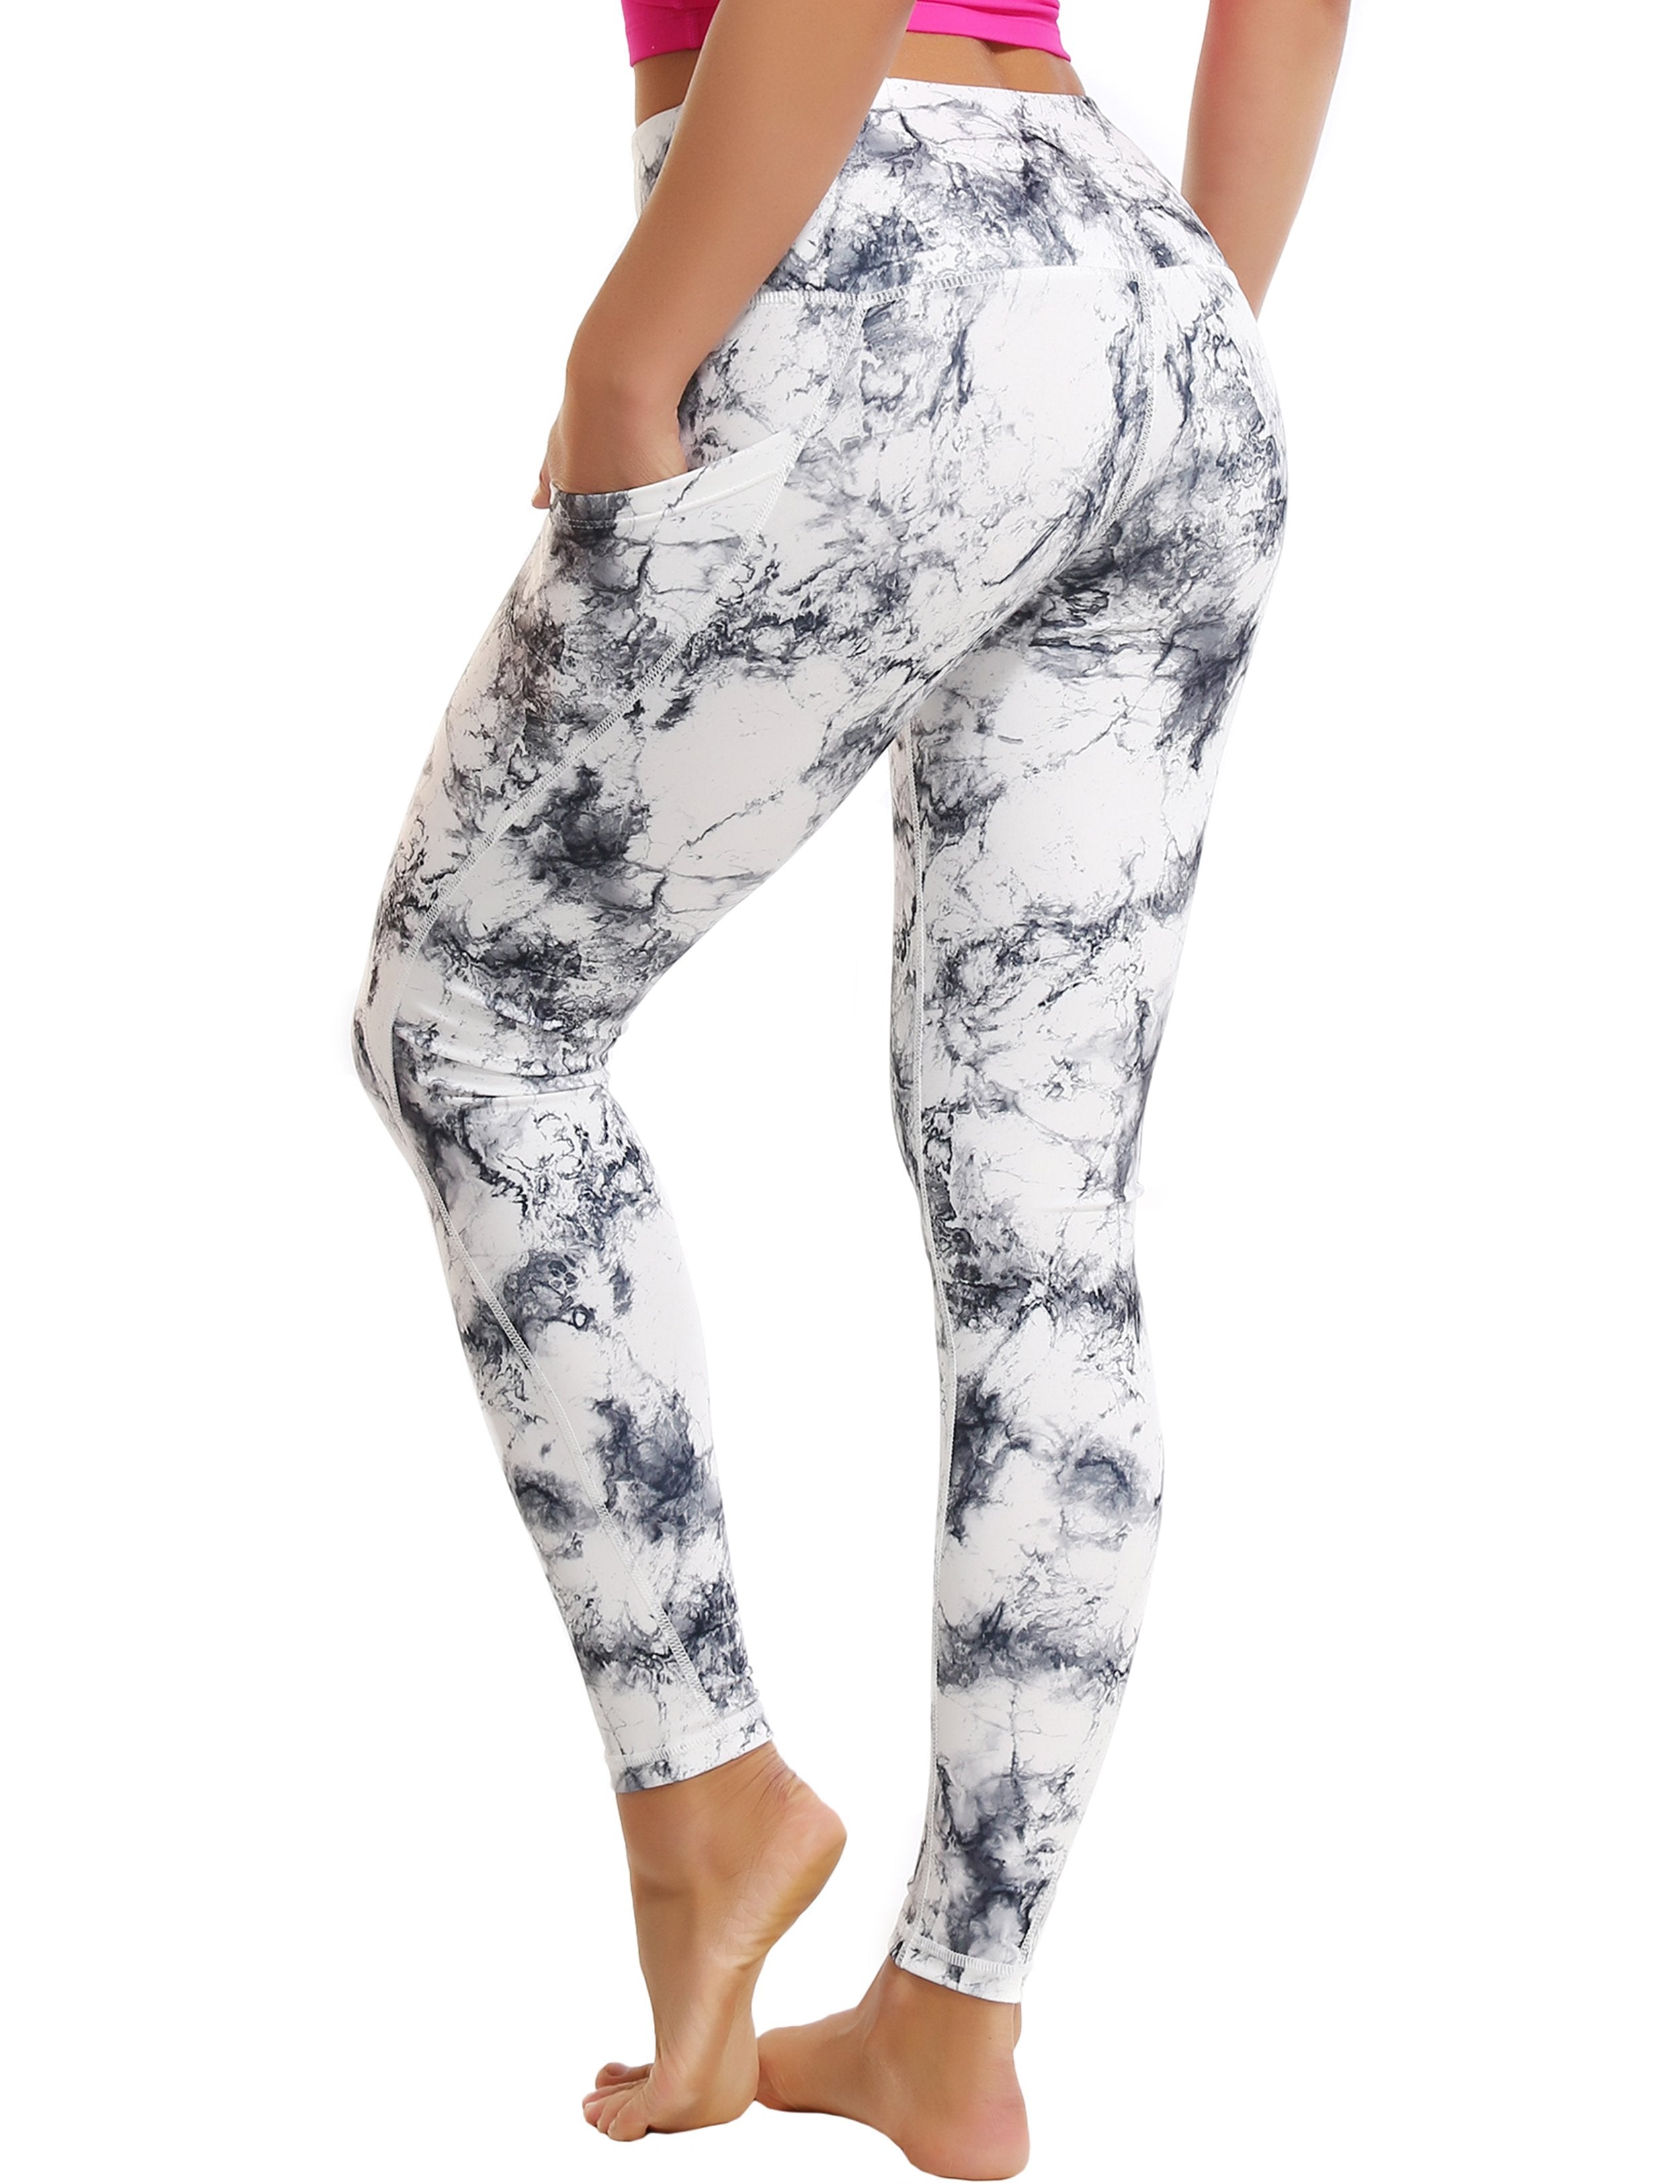 High Waist Side Pockets Golf Pants arabescato 78%Polyester/22%Spandex Fabric doesn't attract lint easily 4-way stretch No see-through Moisture-wicking Tummy control Inner pocket